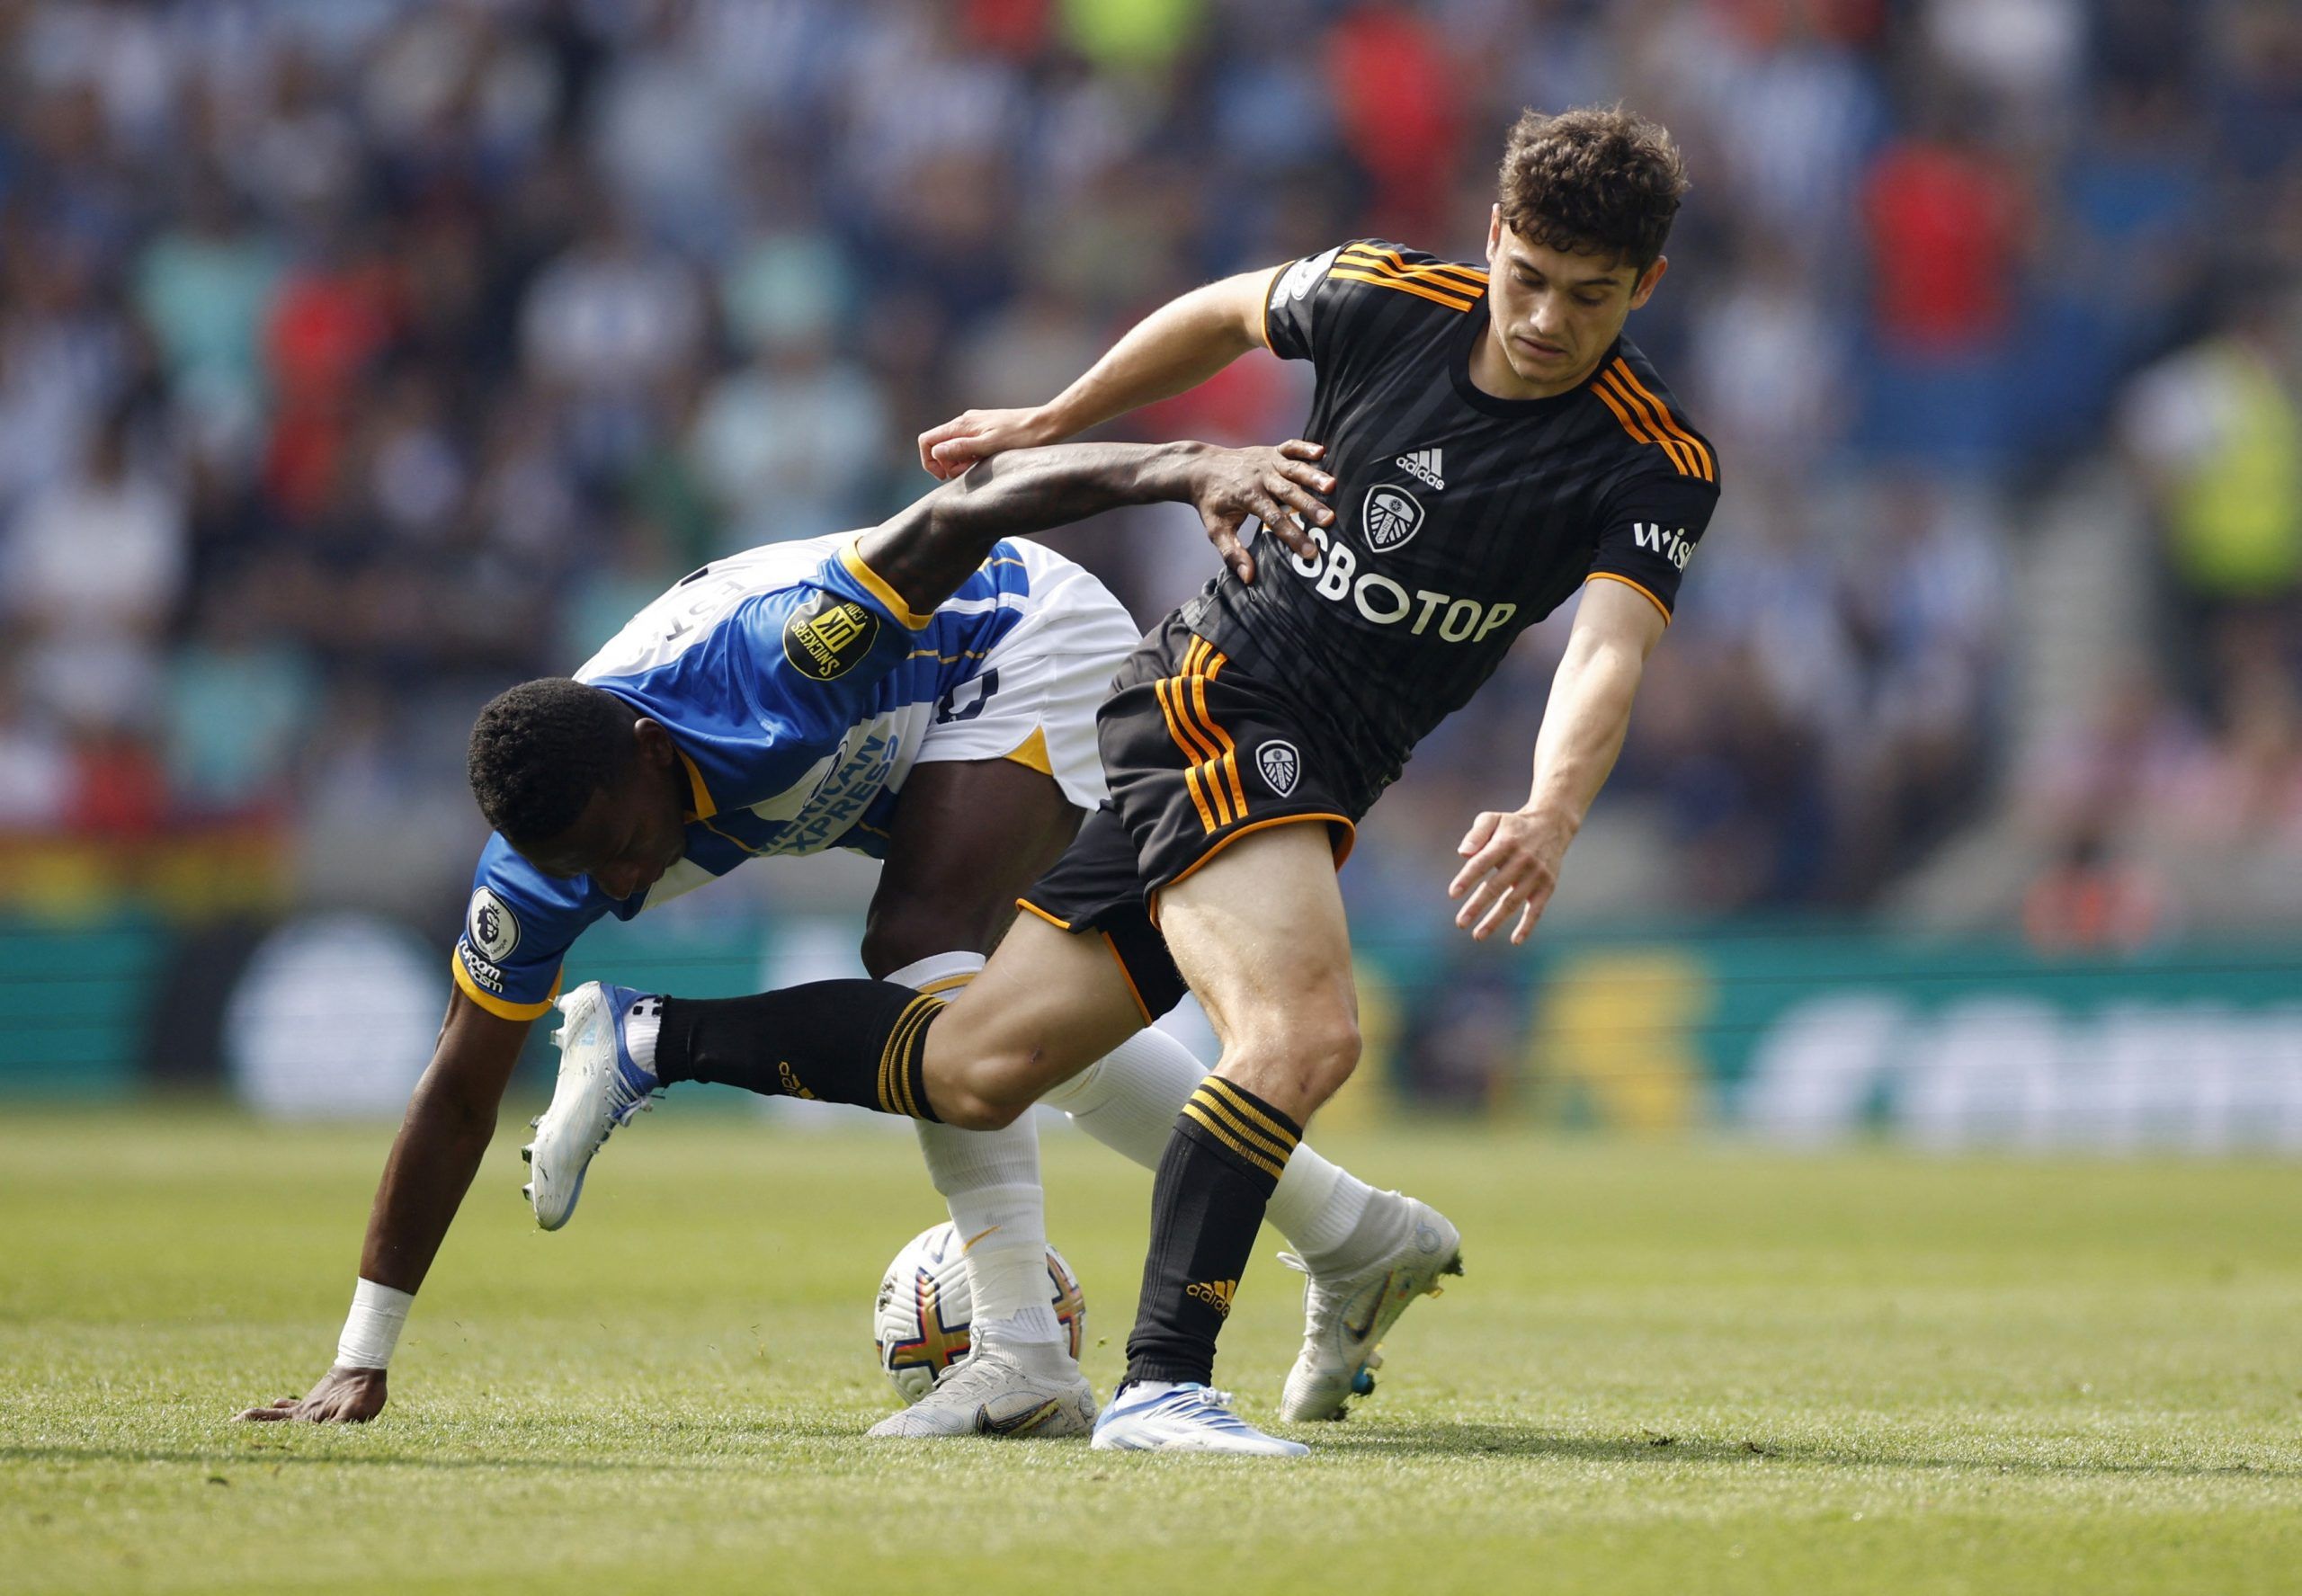 Brighton & Hove Albion's Pervis Estupinan in action with Leeds United's Daniel James